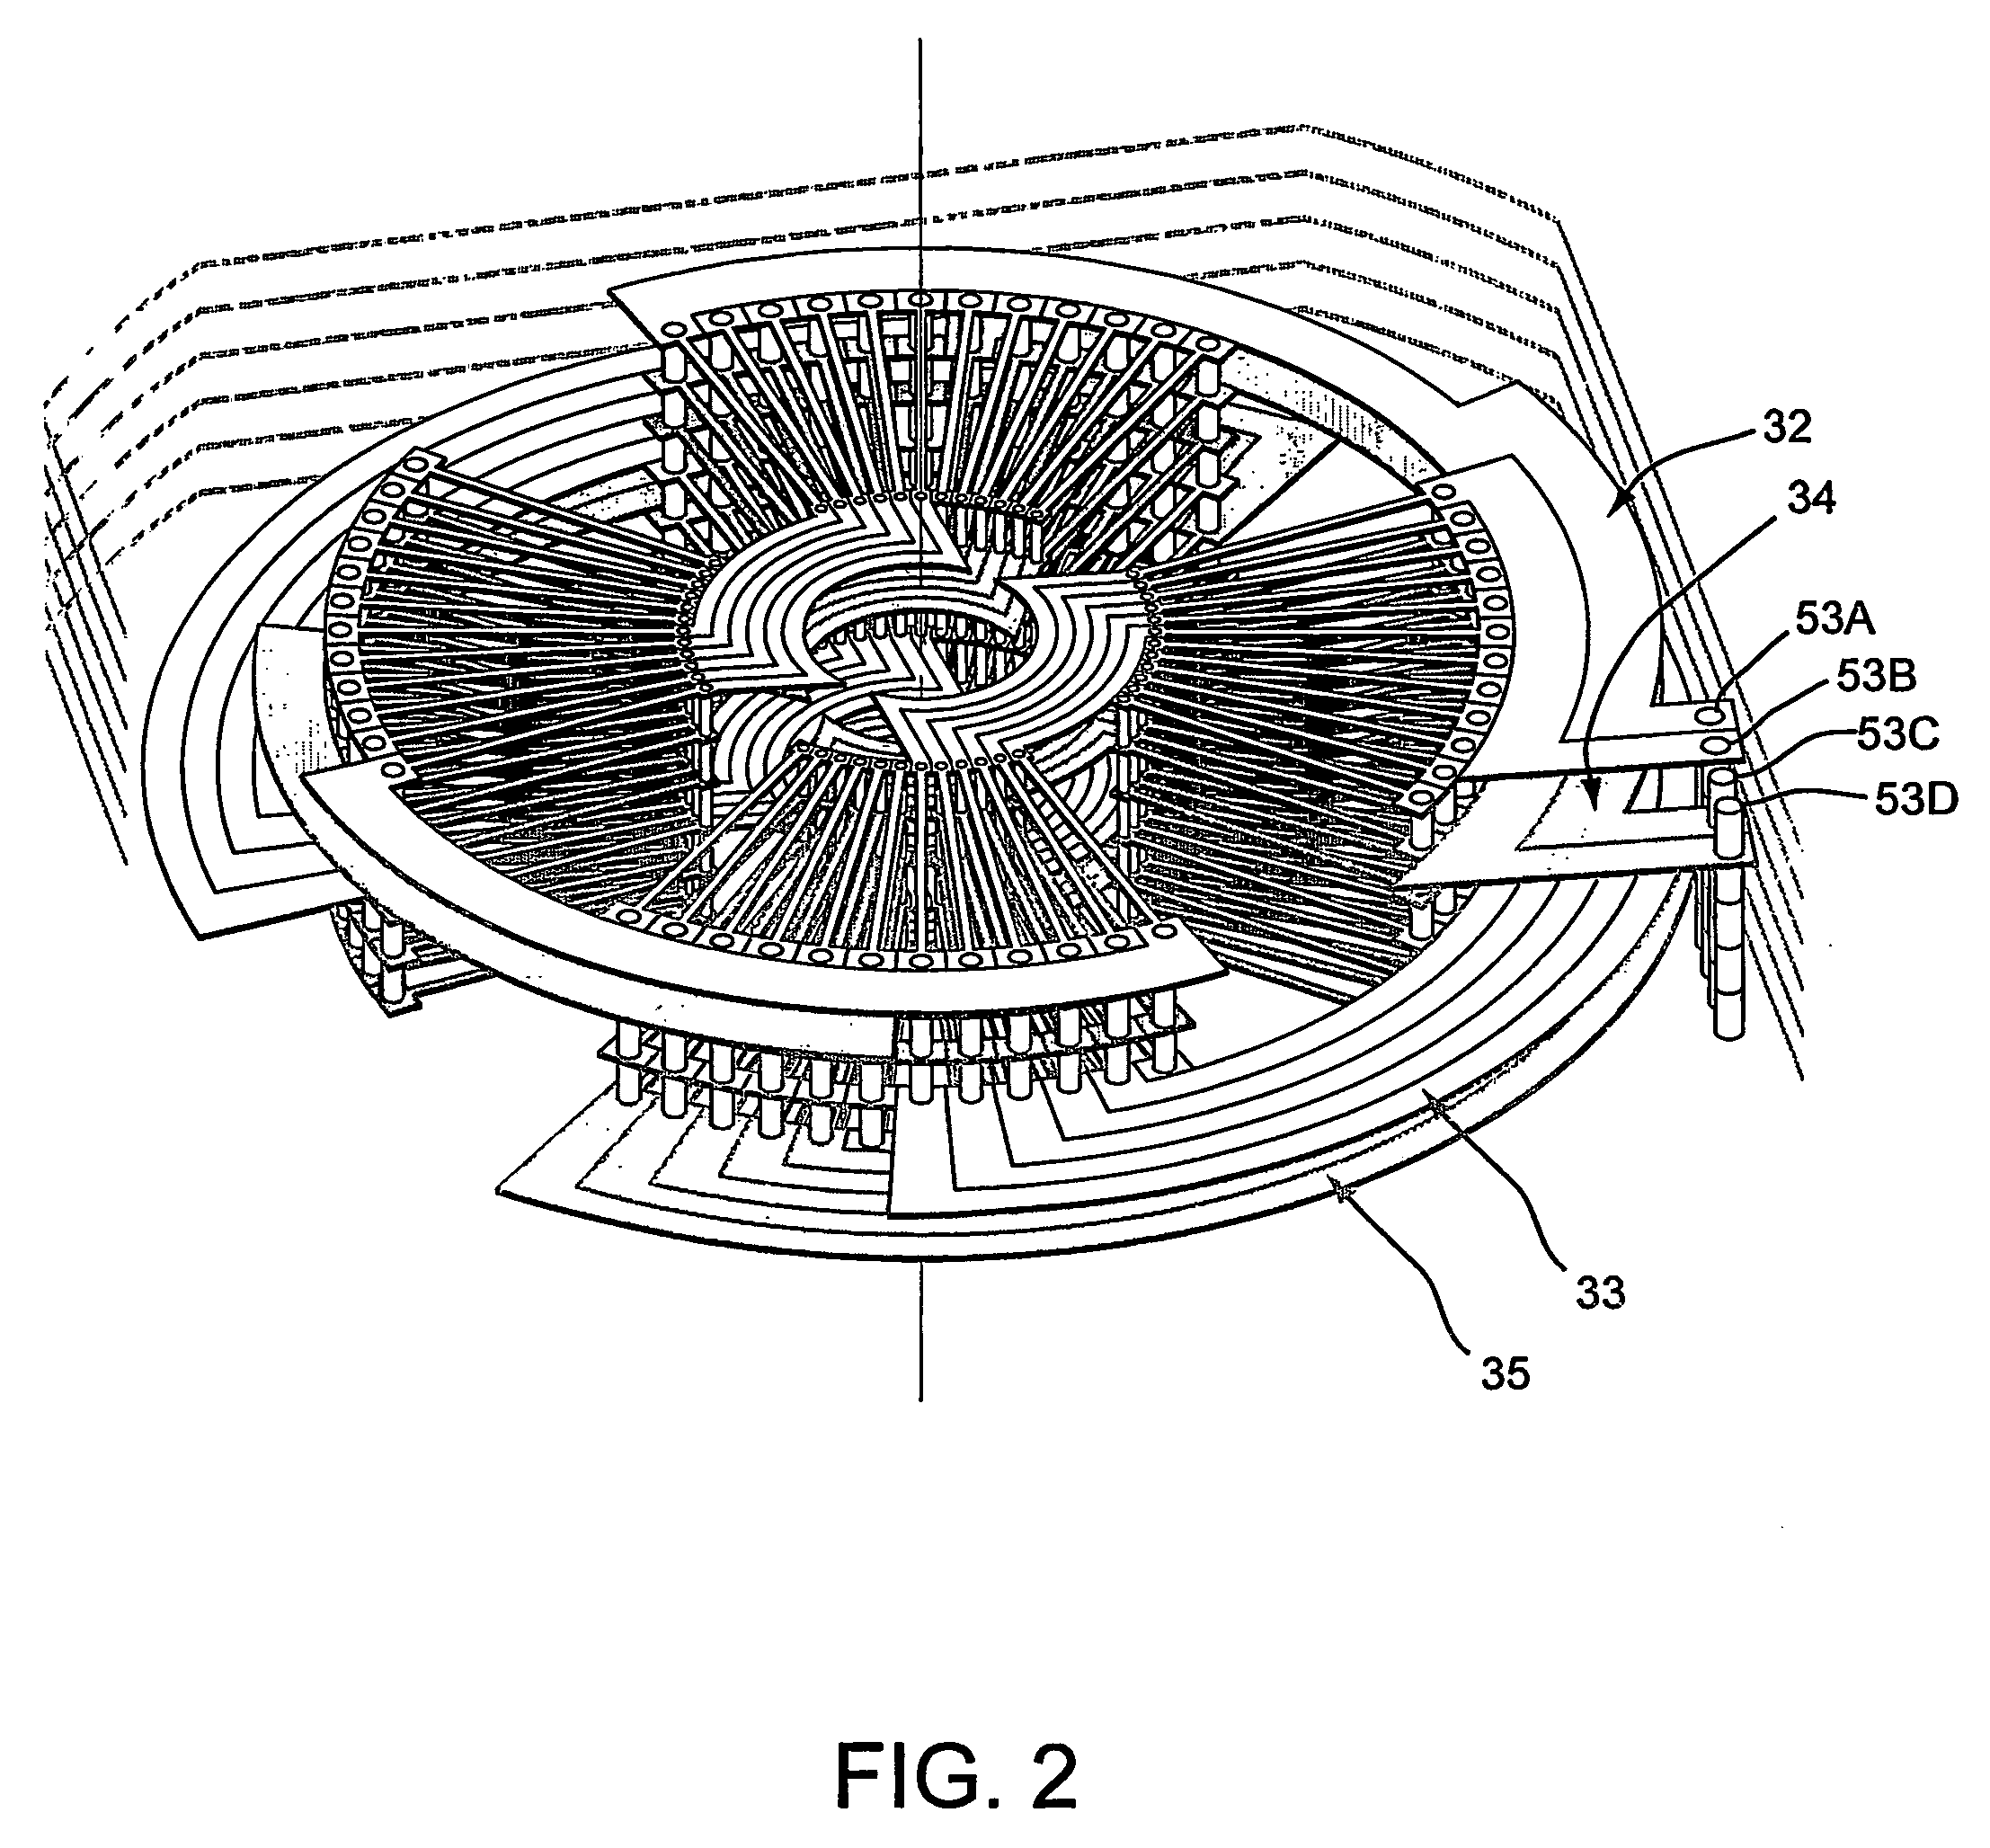 Conductor optimized axial field rotary energy device